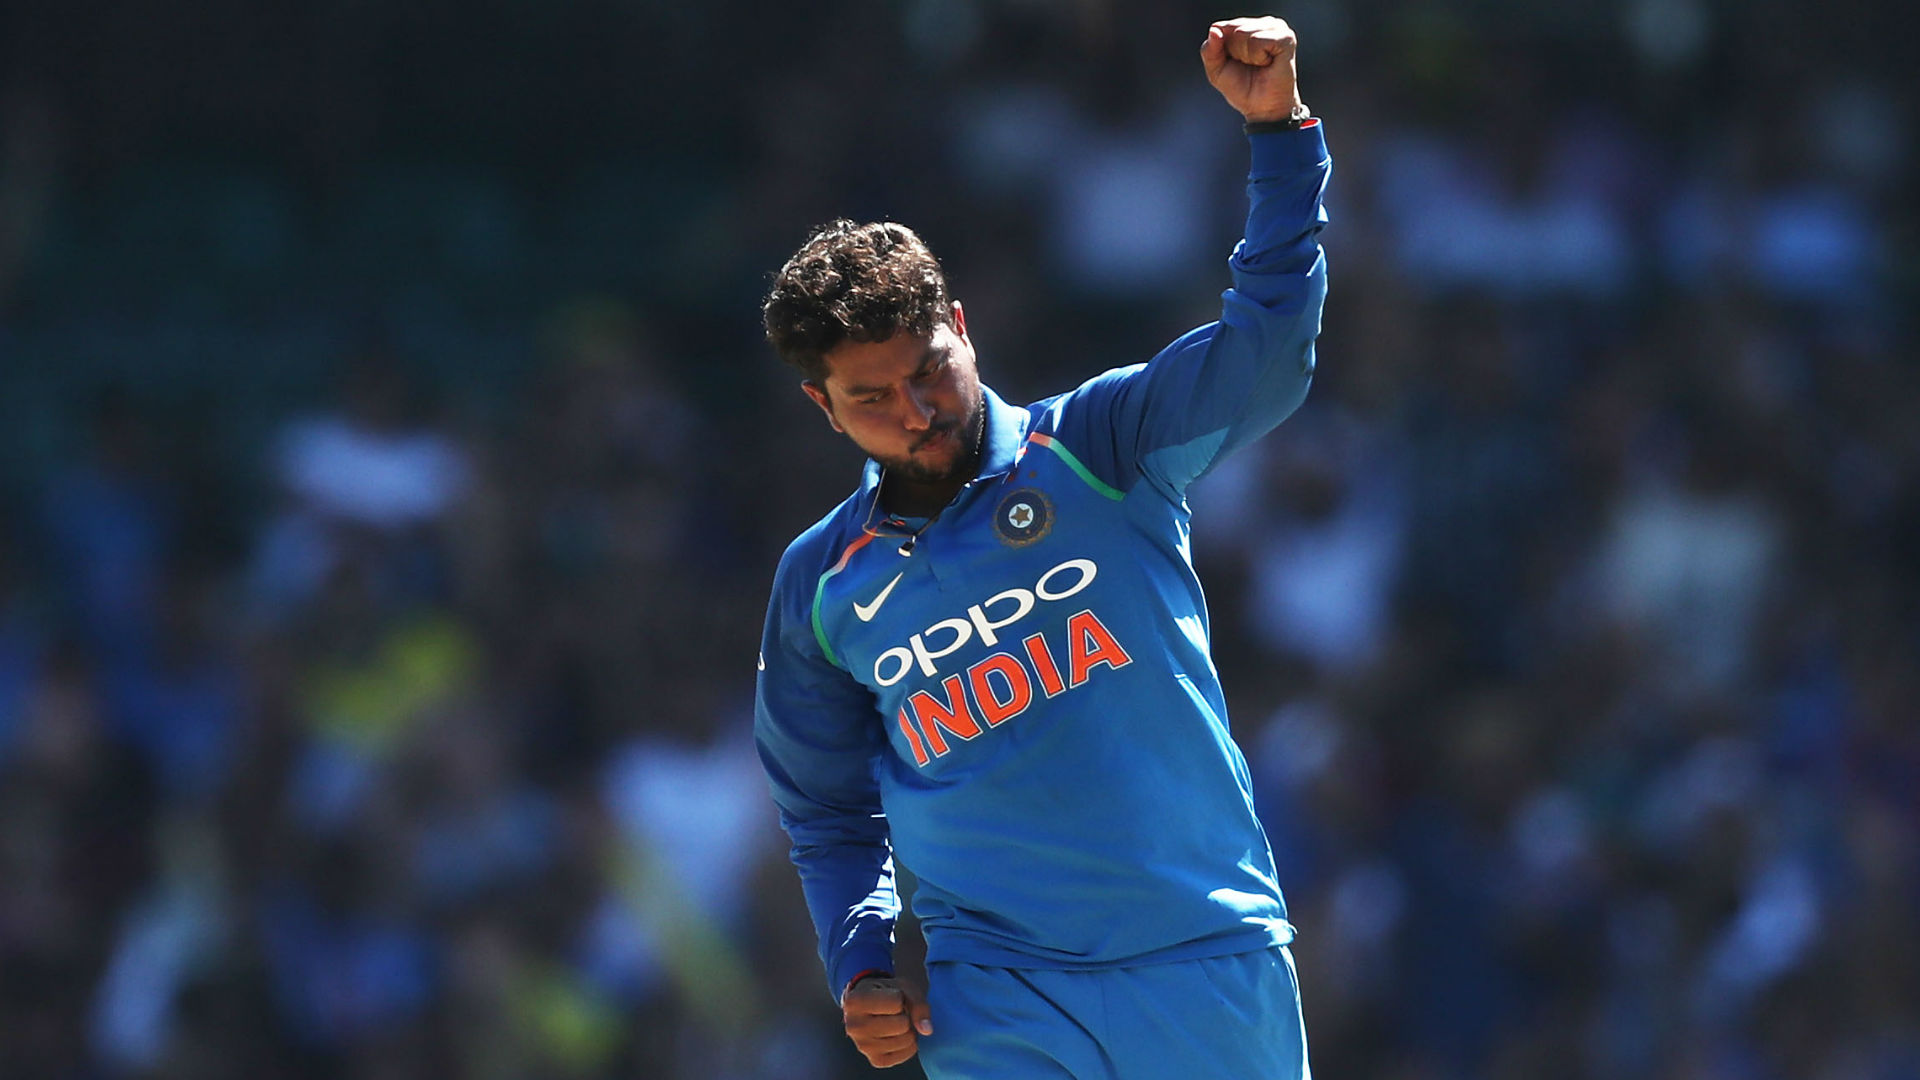 Kuldeep Yadav took 4 wickets against New Zealand in the second ODI in Mount Maungauni. 